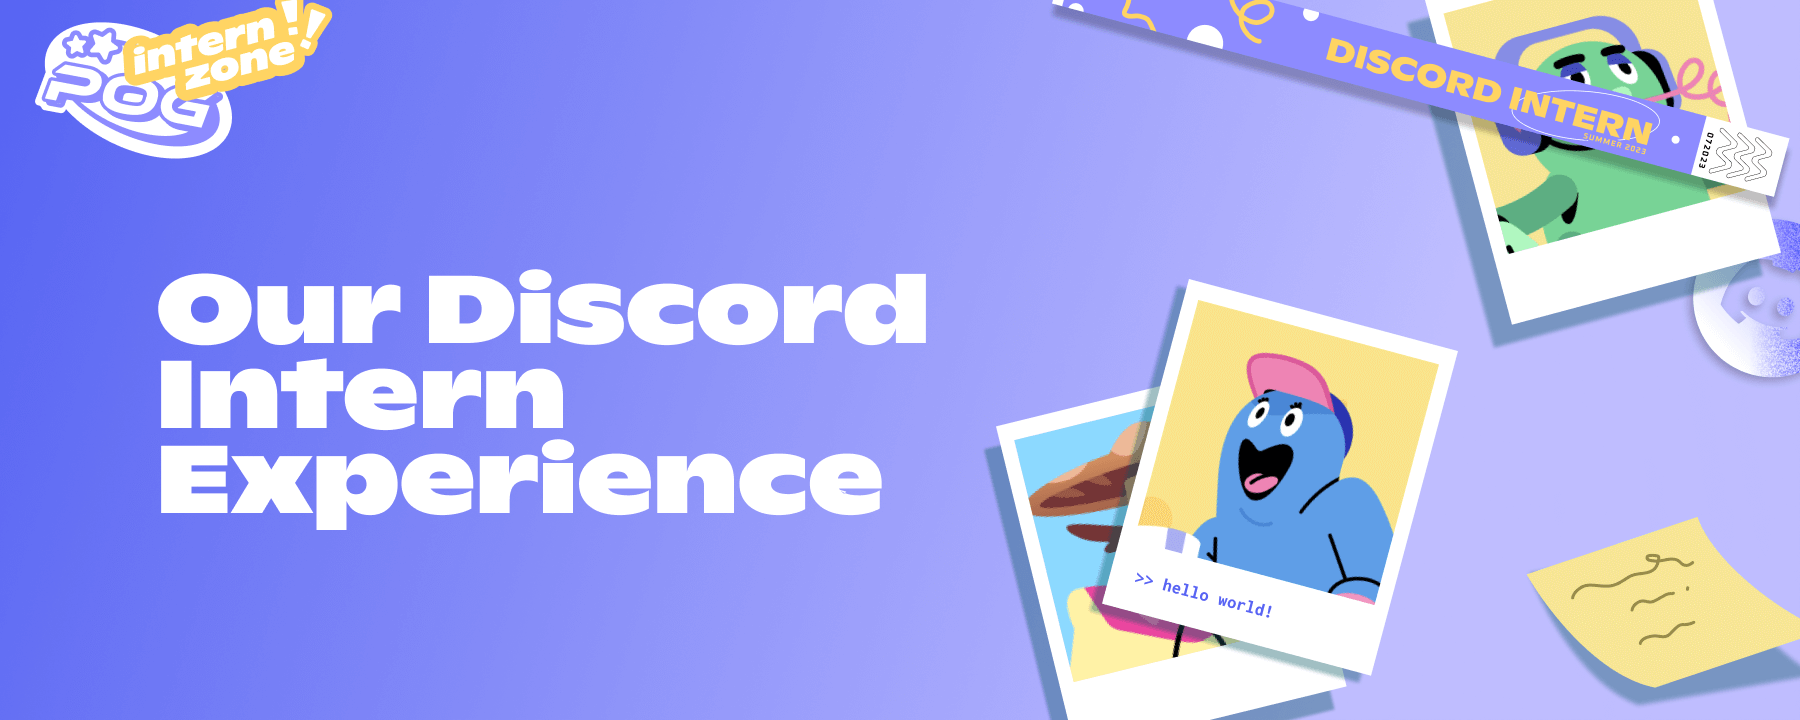 A collection of Polaroid photos of Discord characters, sticky notes, and event wristbands. The writing on the image reads: “Our Discord Intern Experience.” 